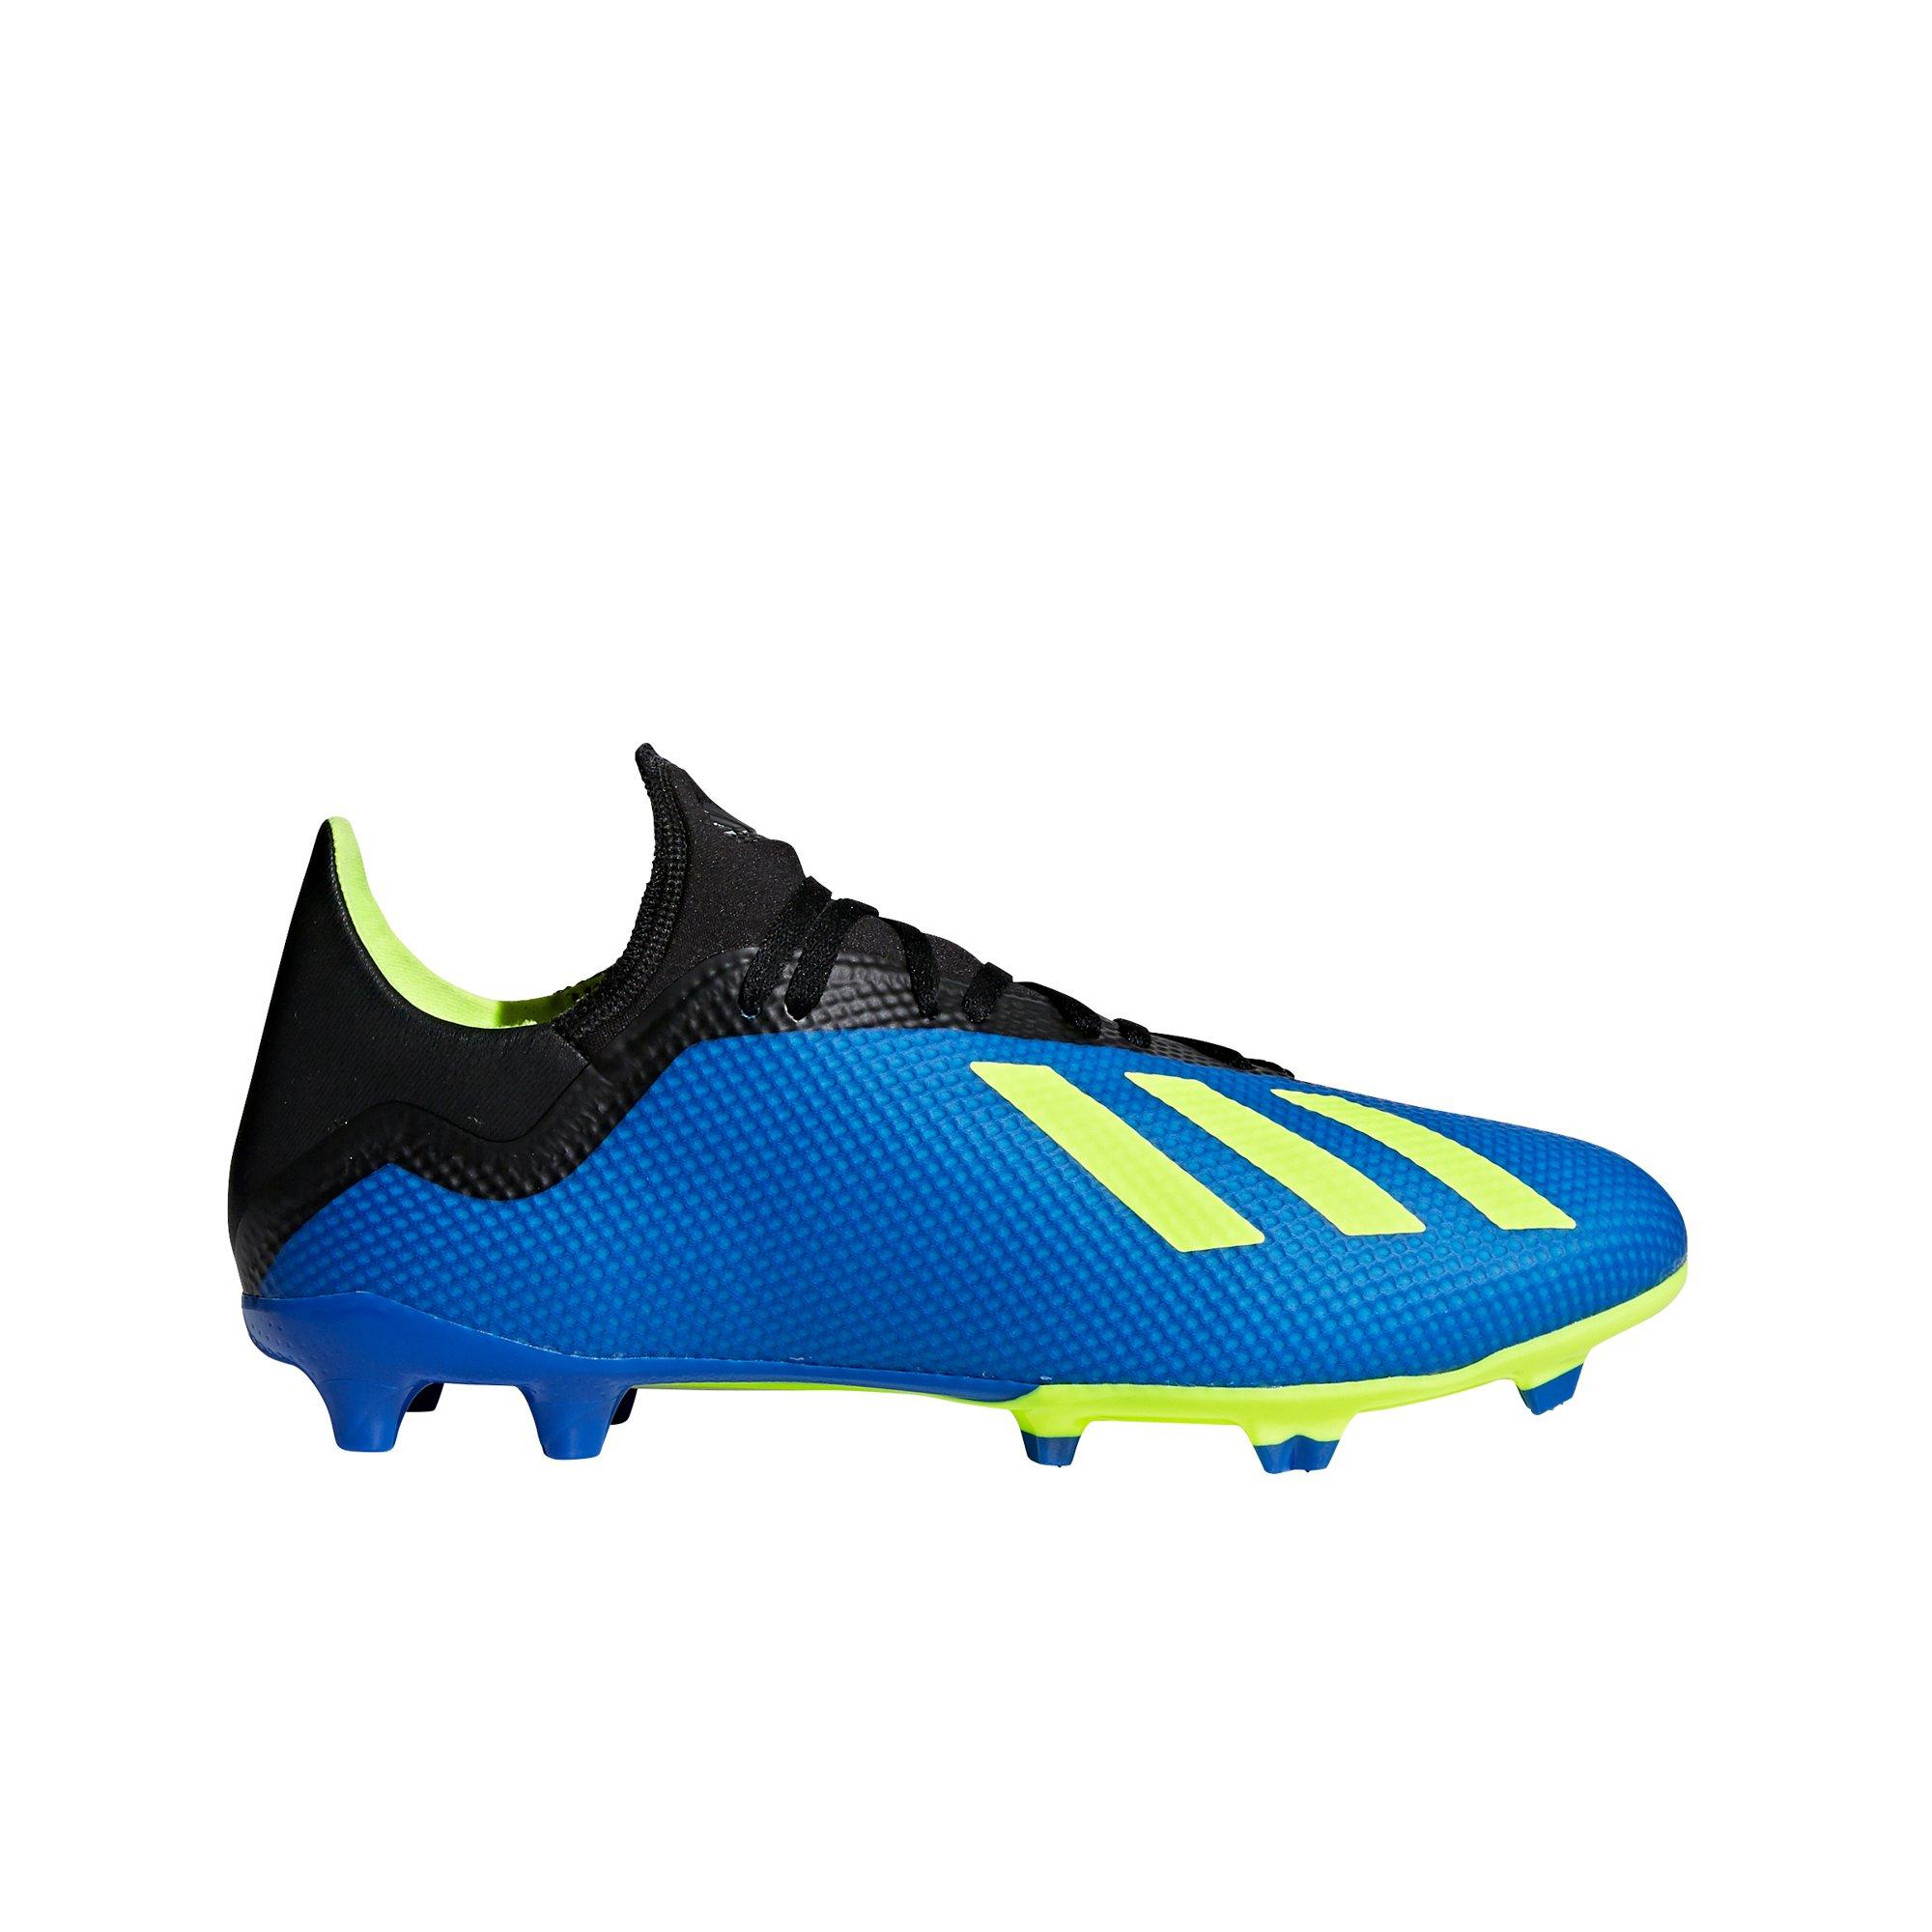 adidas soccer cleats 18.3